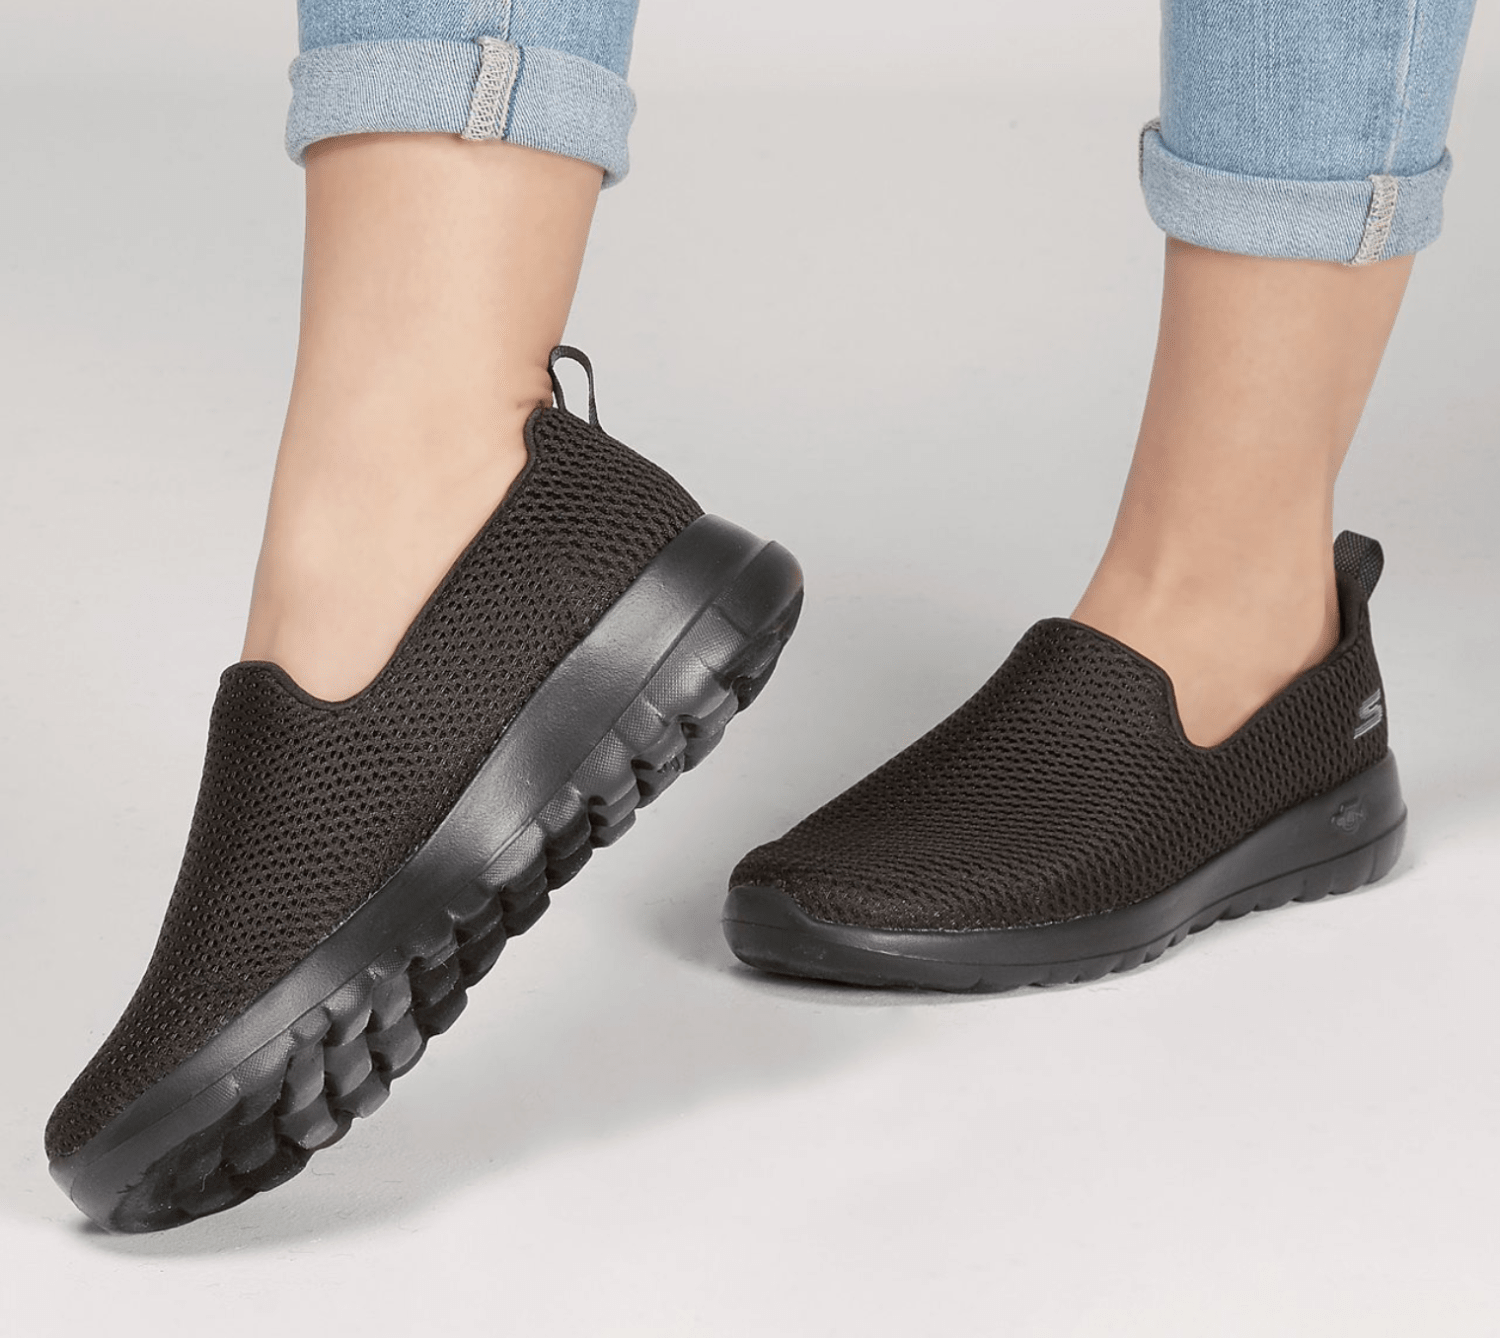 The Skechers GOWalk shoes are perfect for a quick